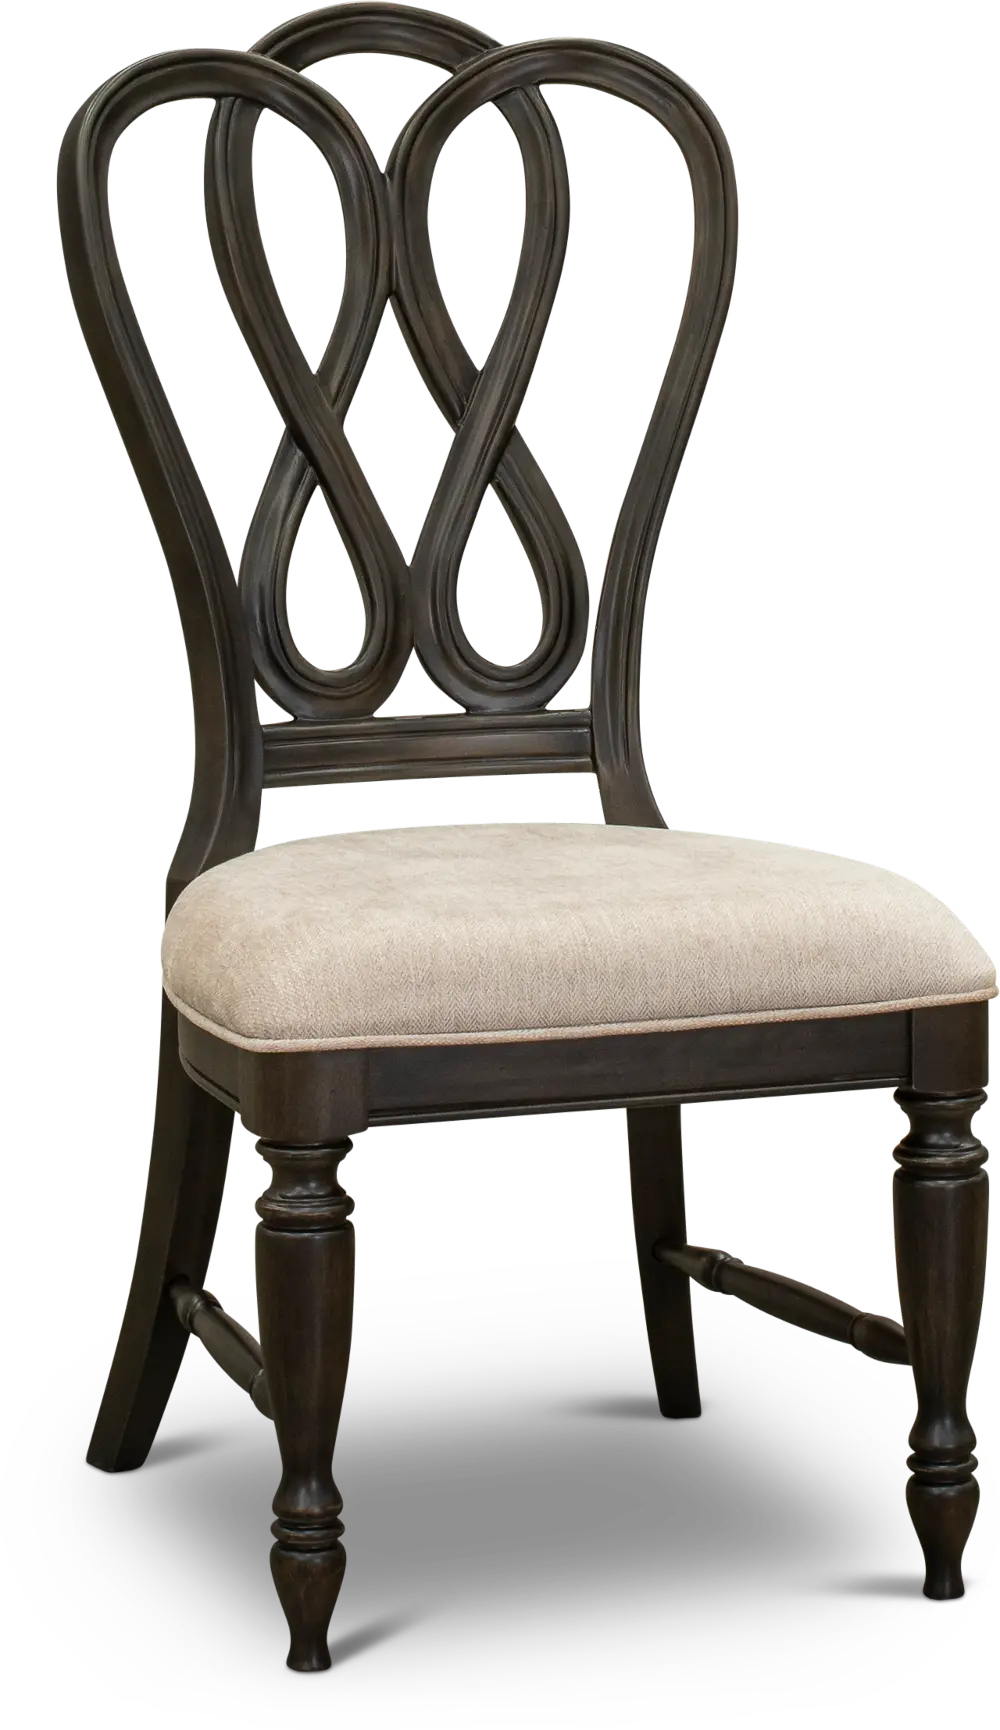 Traditional Antique Black Upholstered Dining Room Chair - Natchez Trace-1